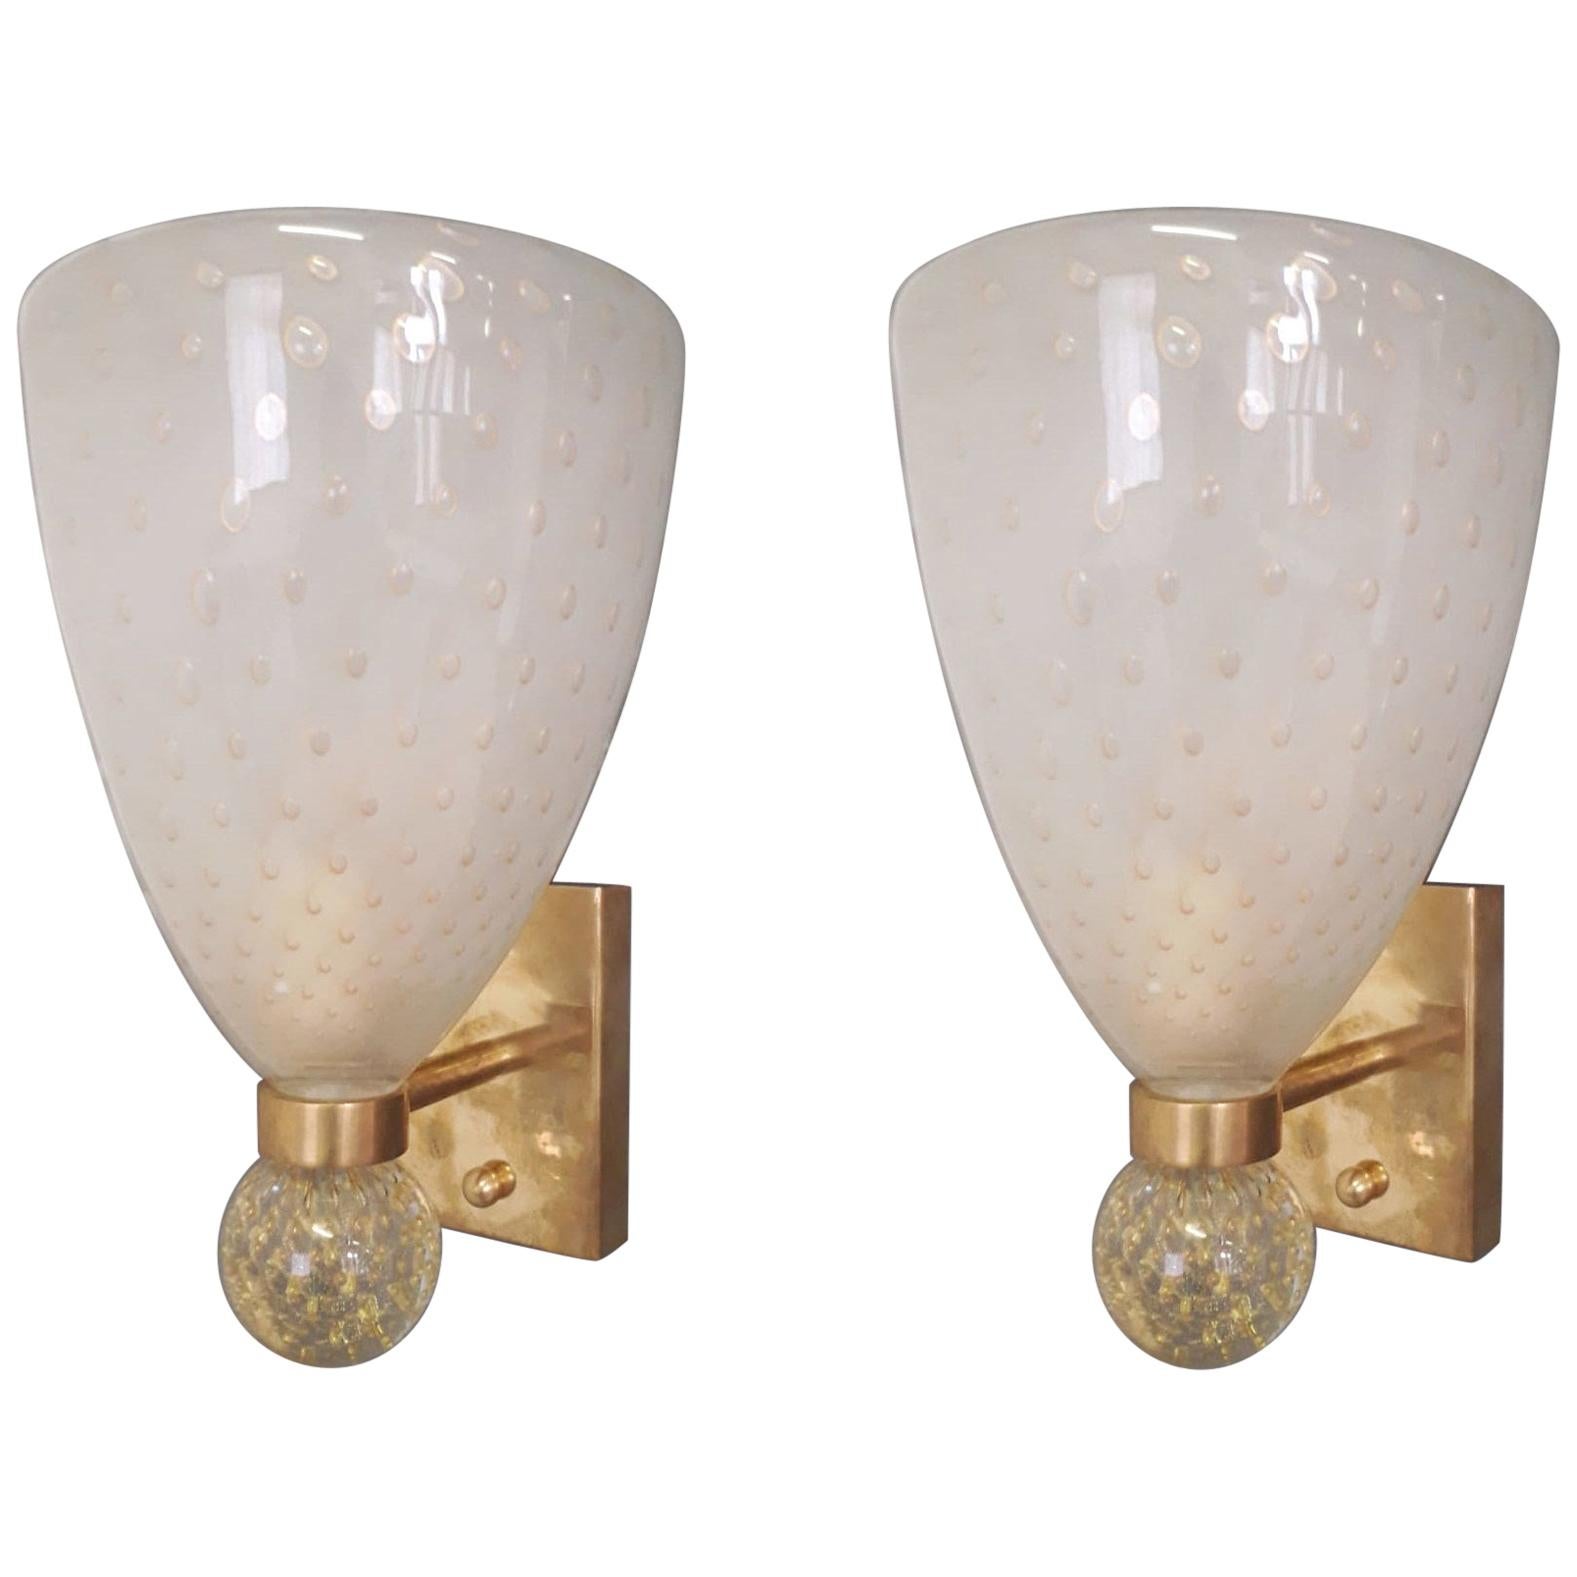 Pair of Coppa Sconces by Fabio Ltd - 3 Pairs Available